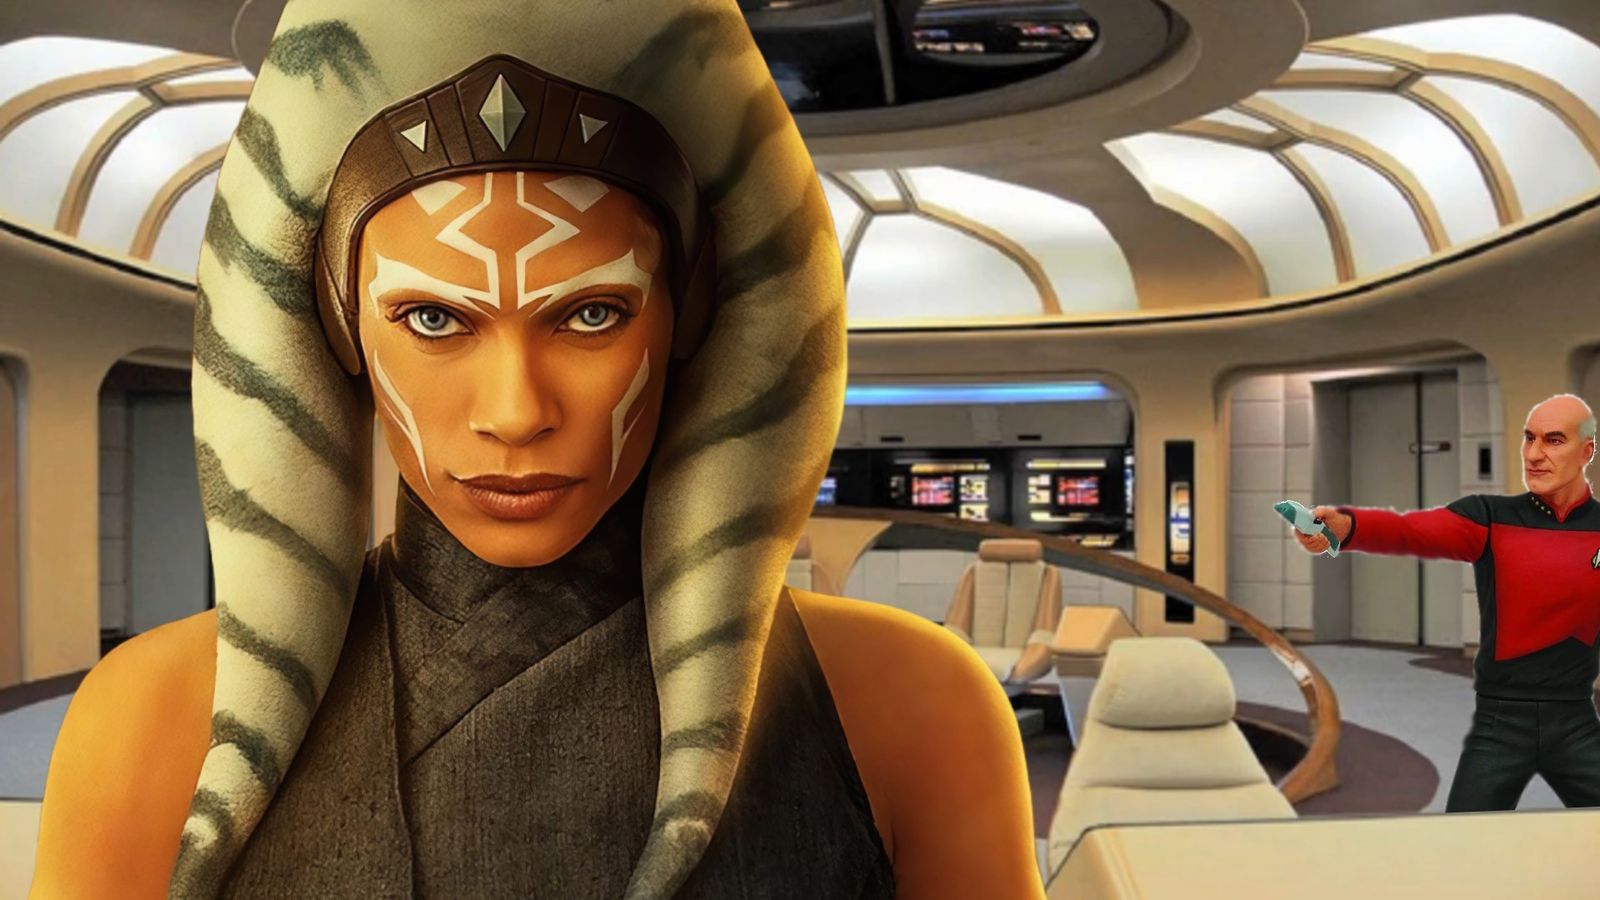 ahsoka tano from star wars is standing on the bridge of Star Trek's USS Enterprise from The Next Generation as Picard aims a phaser towards her